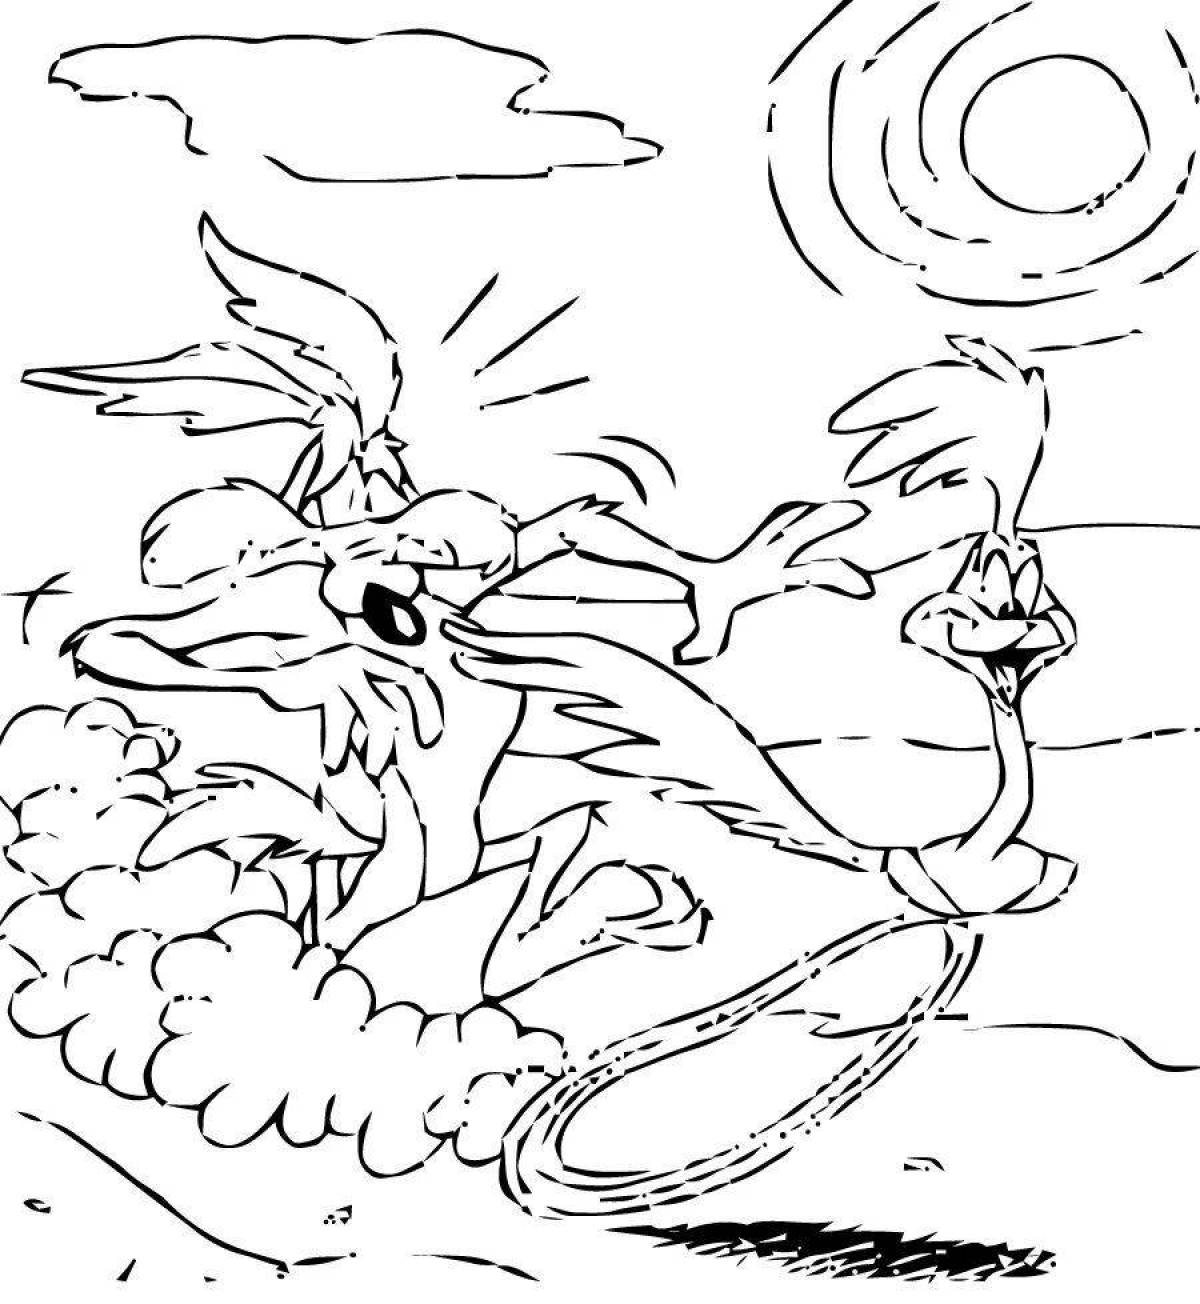 Color-vivid road runner coloring page